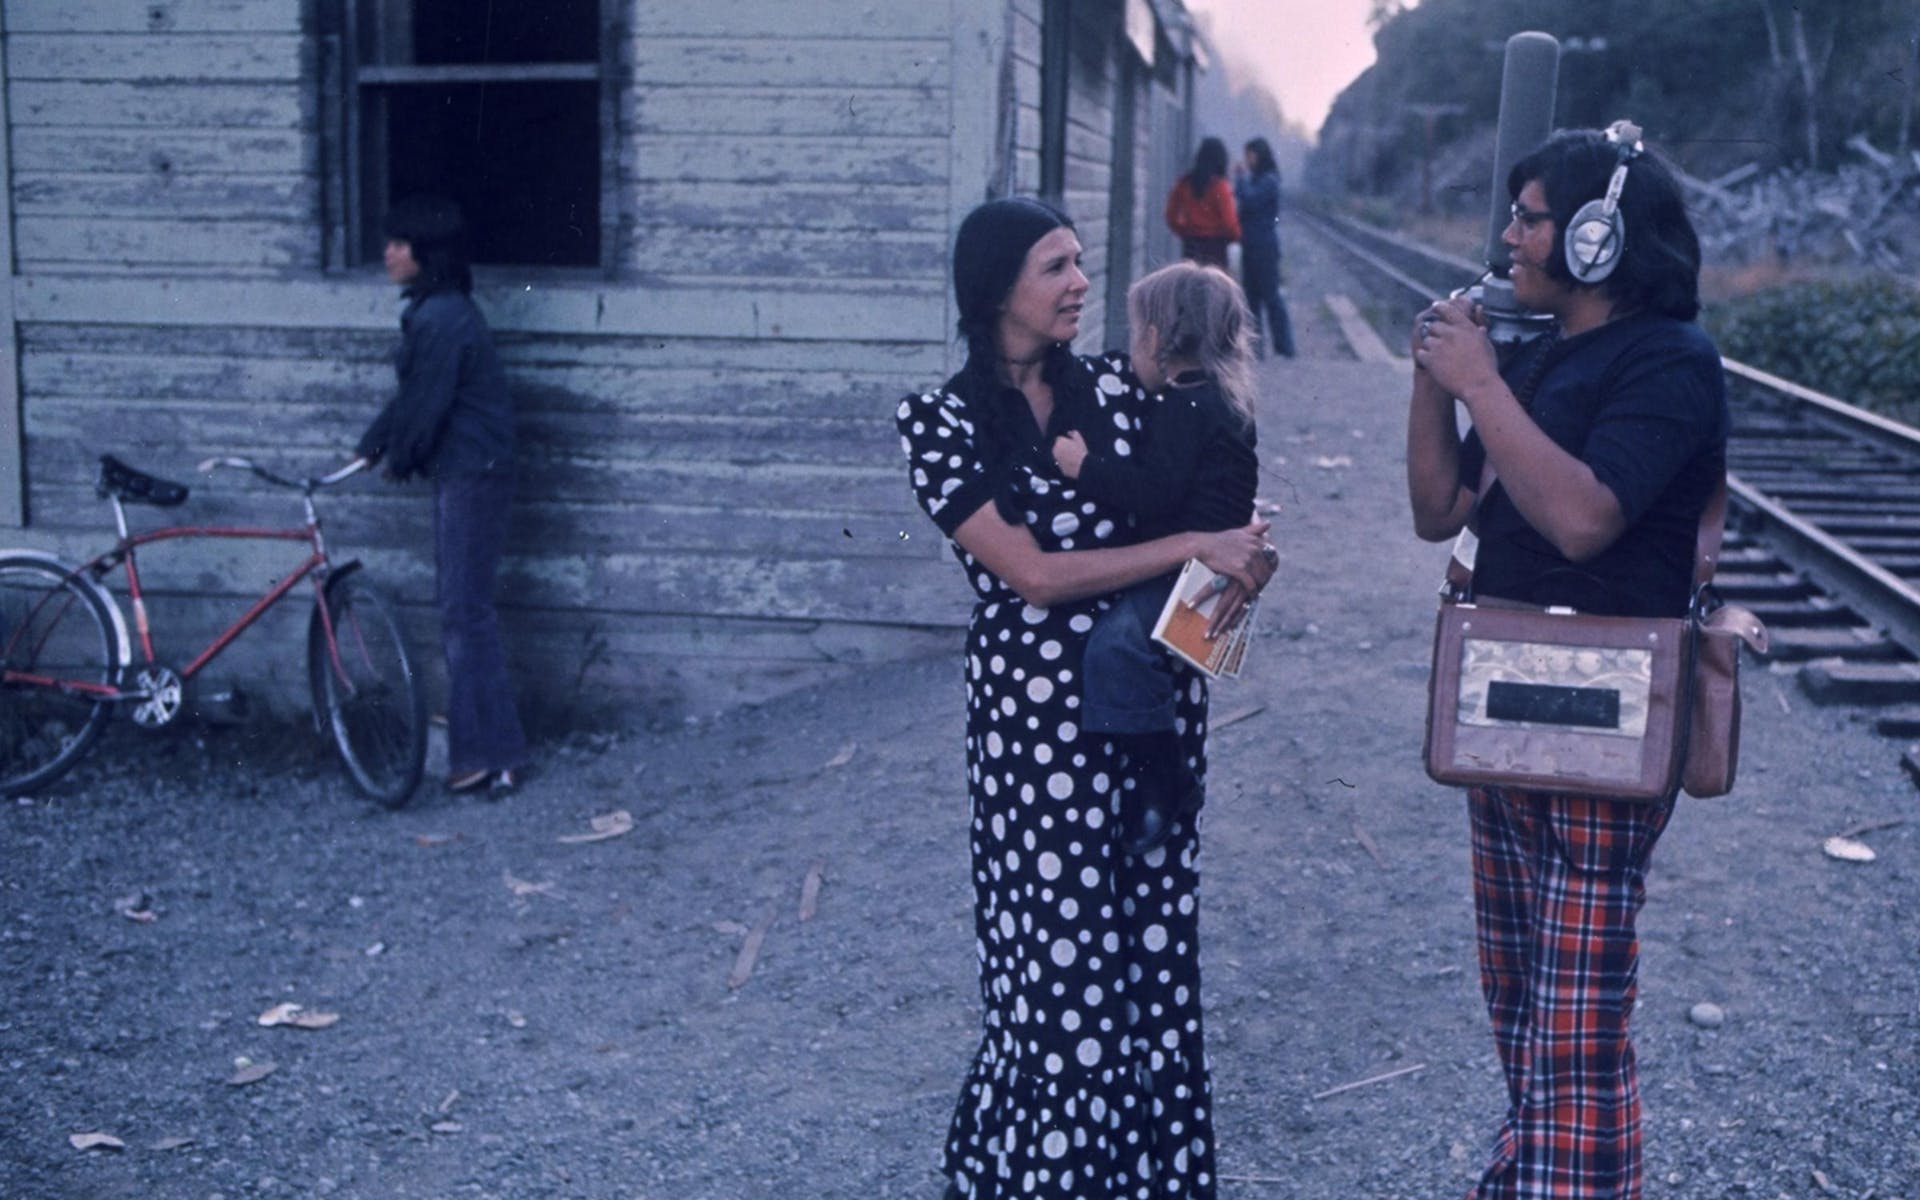 Alanis Obomsawin in a long polka dot dress holding a child and talking with a film crew member outdoors near train tracks.